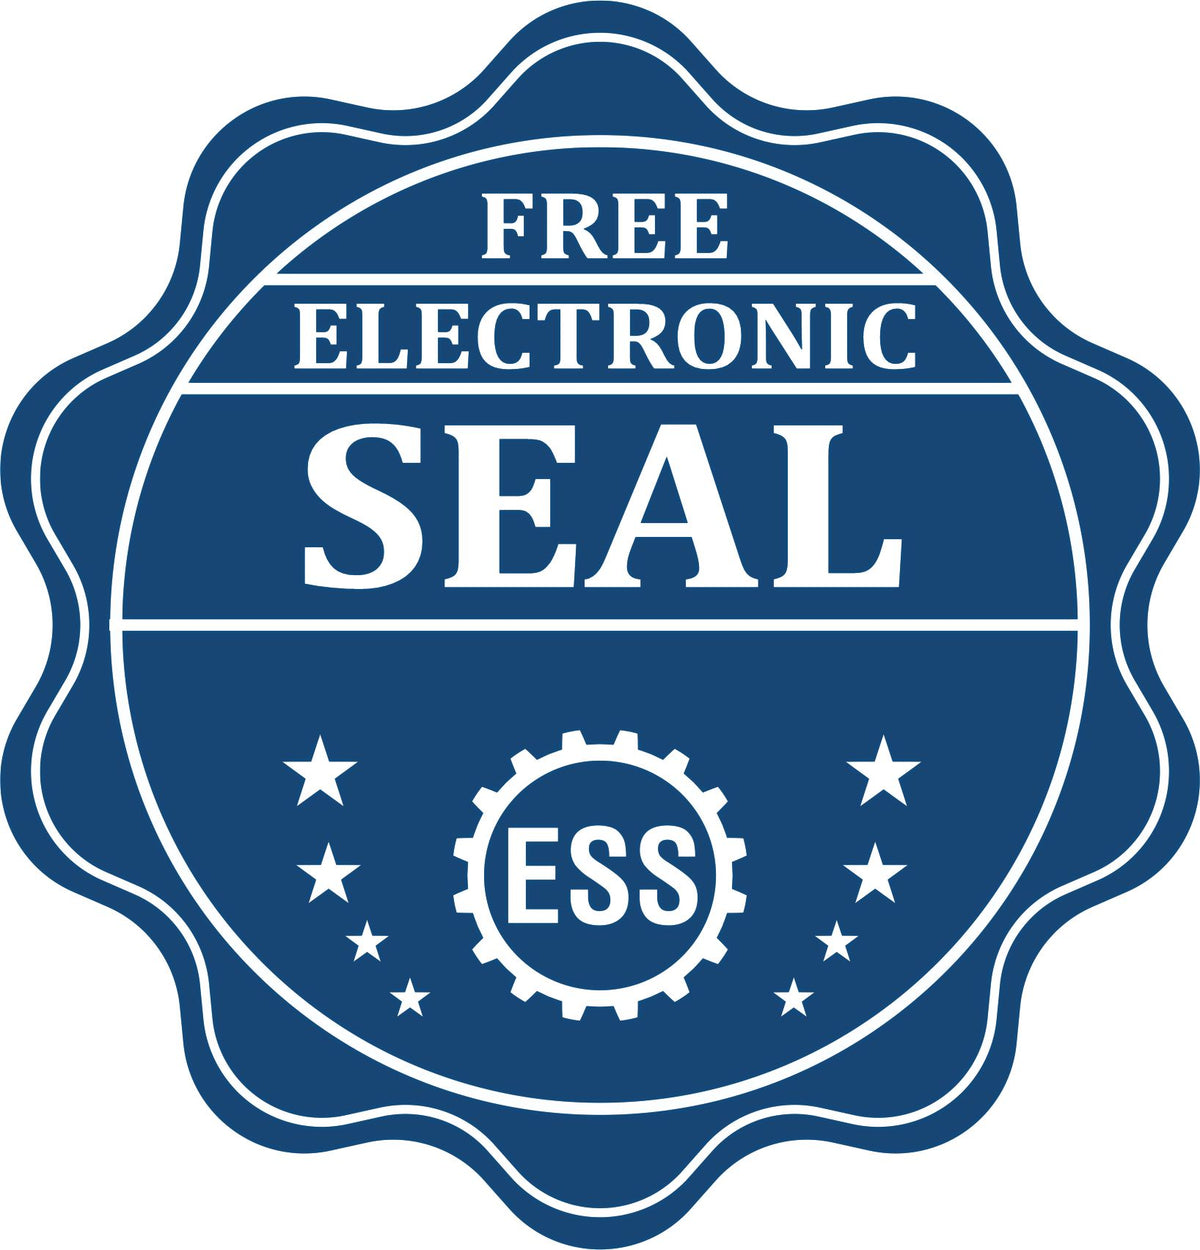 A badge showing a free electronic seal for the Heavy Duty Cast Iron Kentucky Architect Embosser with stars and the ESS gear on the emblem.